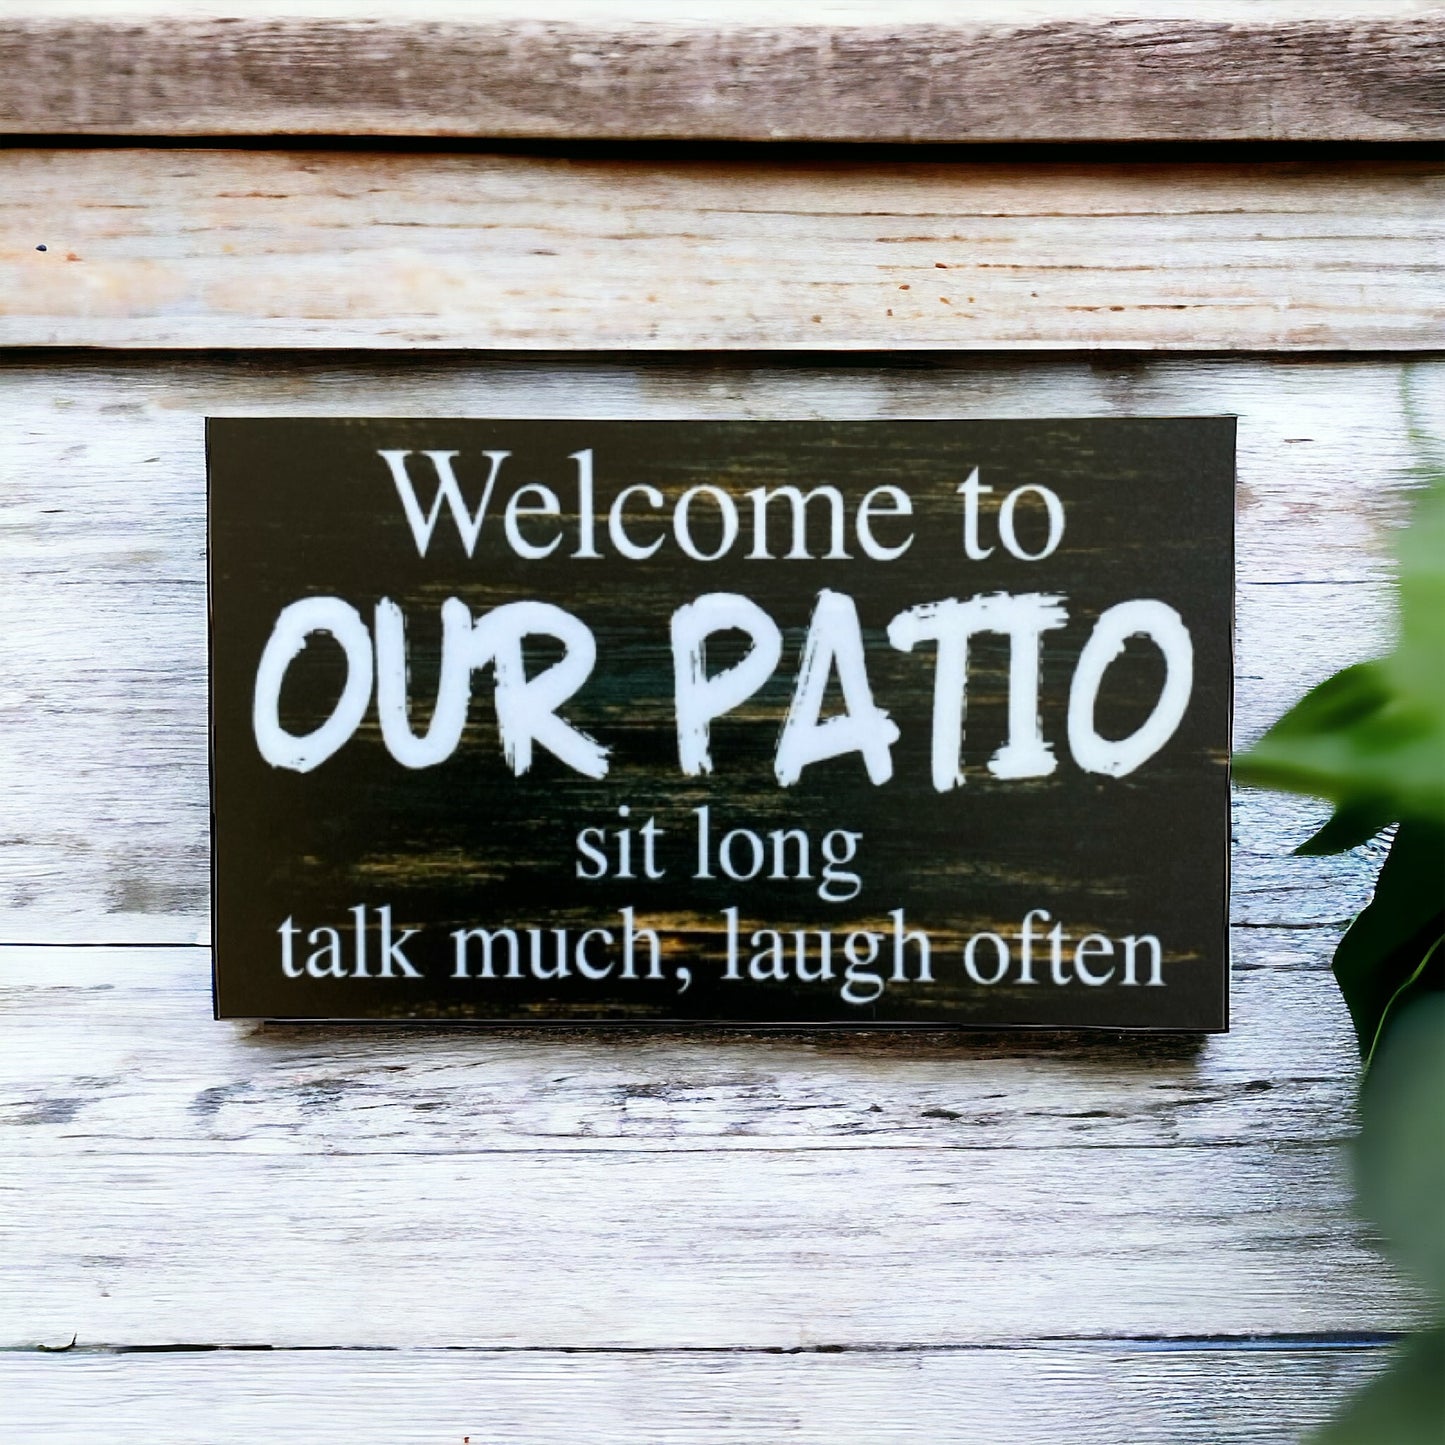 Welcome Patio Sit Long Talk Laugh Vintage Sign - The Renmy Store Homewares & Gifts 